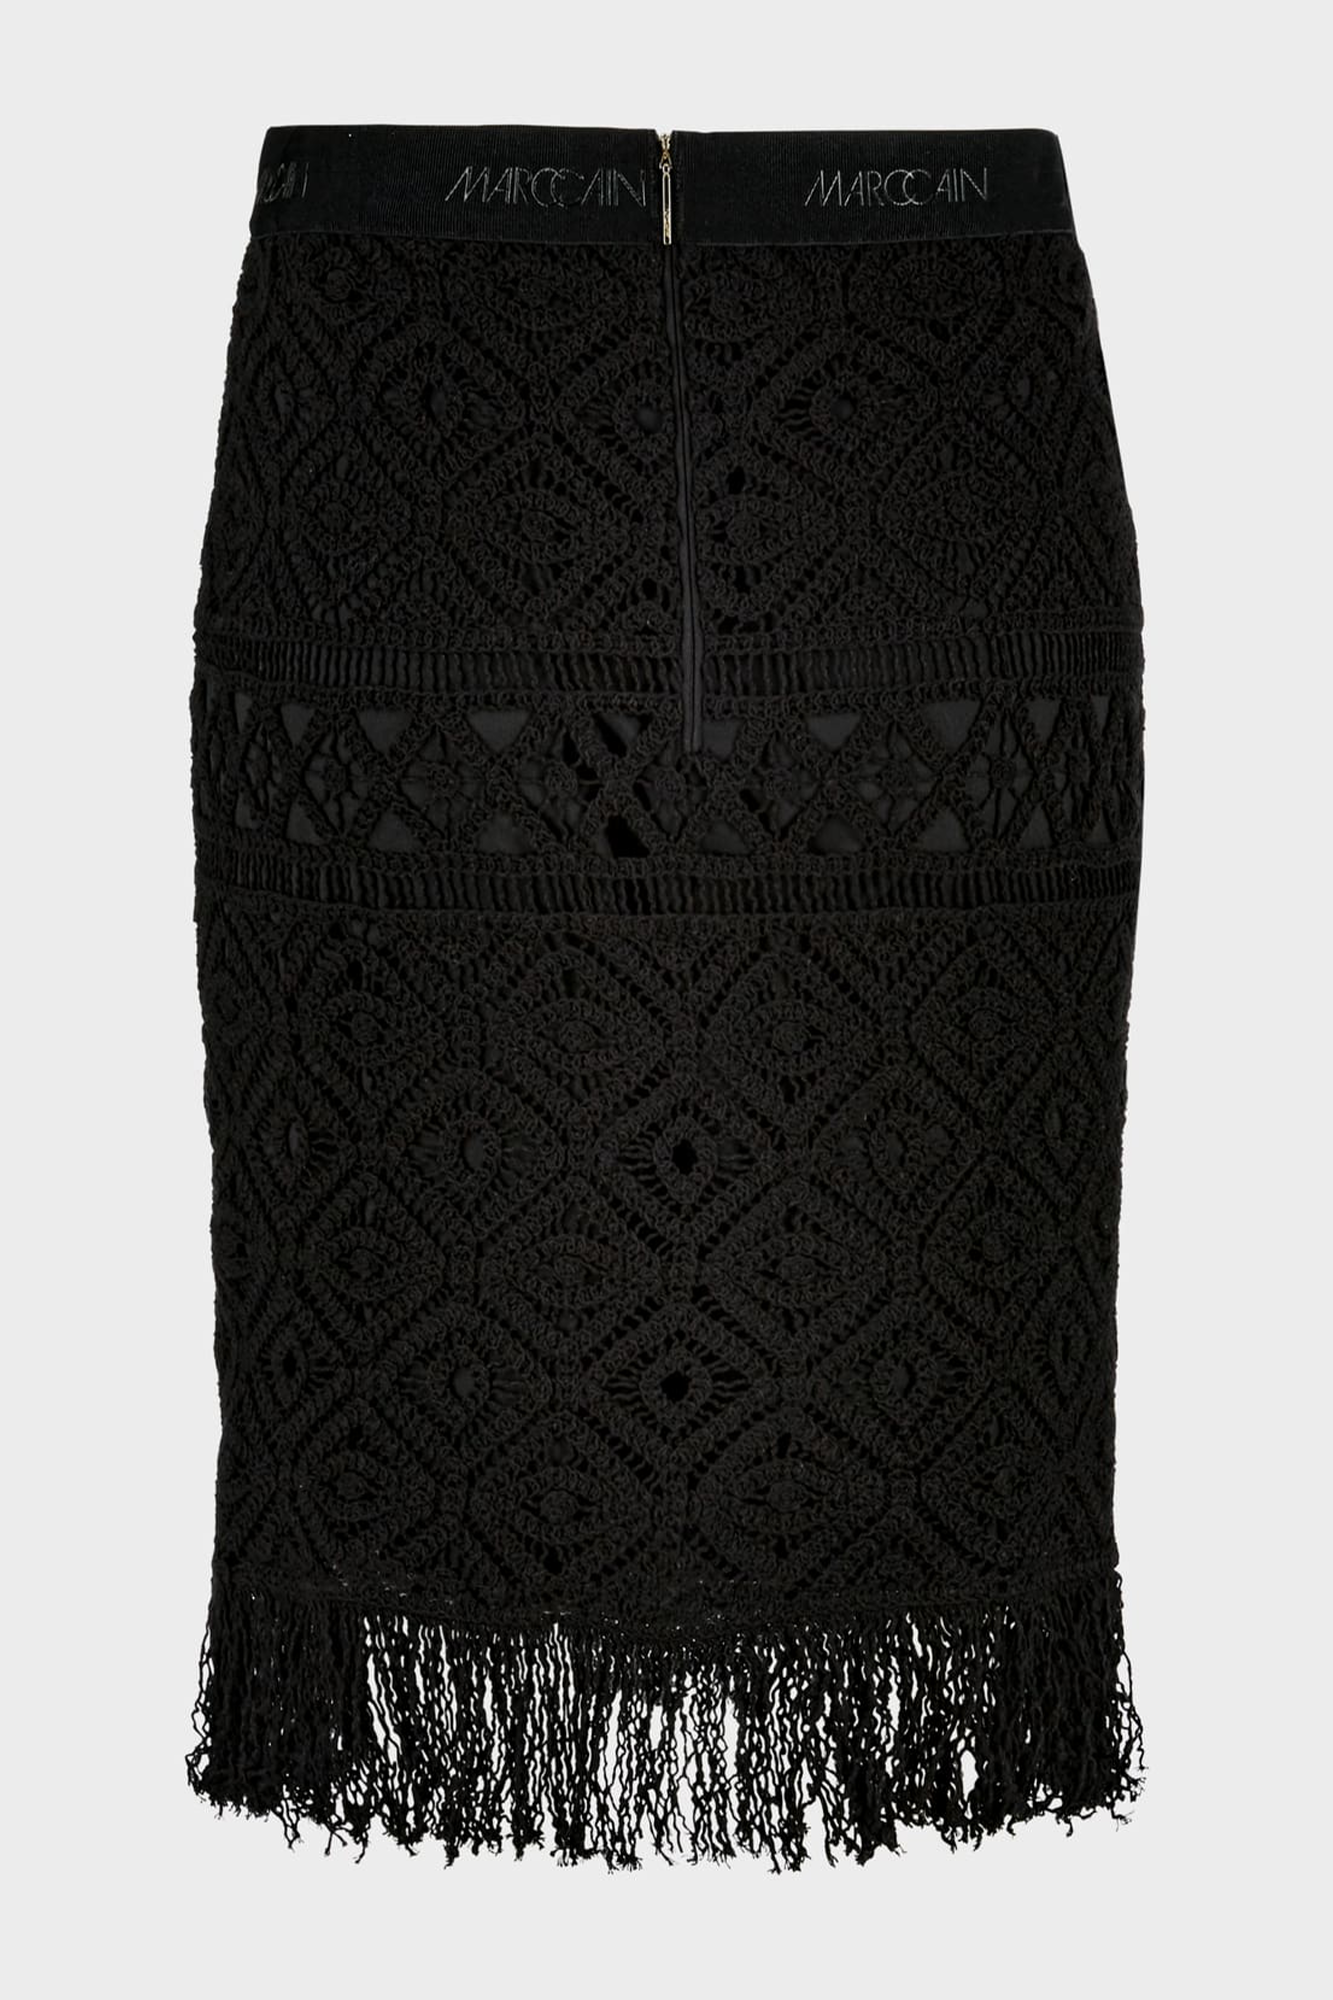 Ourika Gardens Short Skirt Mad From Crochet Lace Black